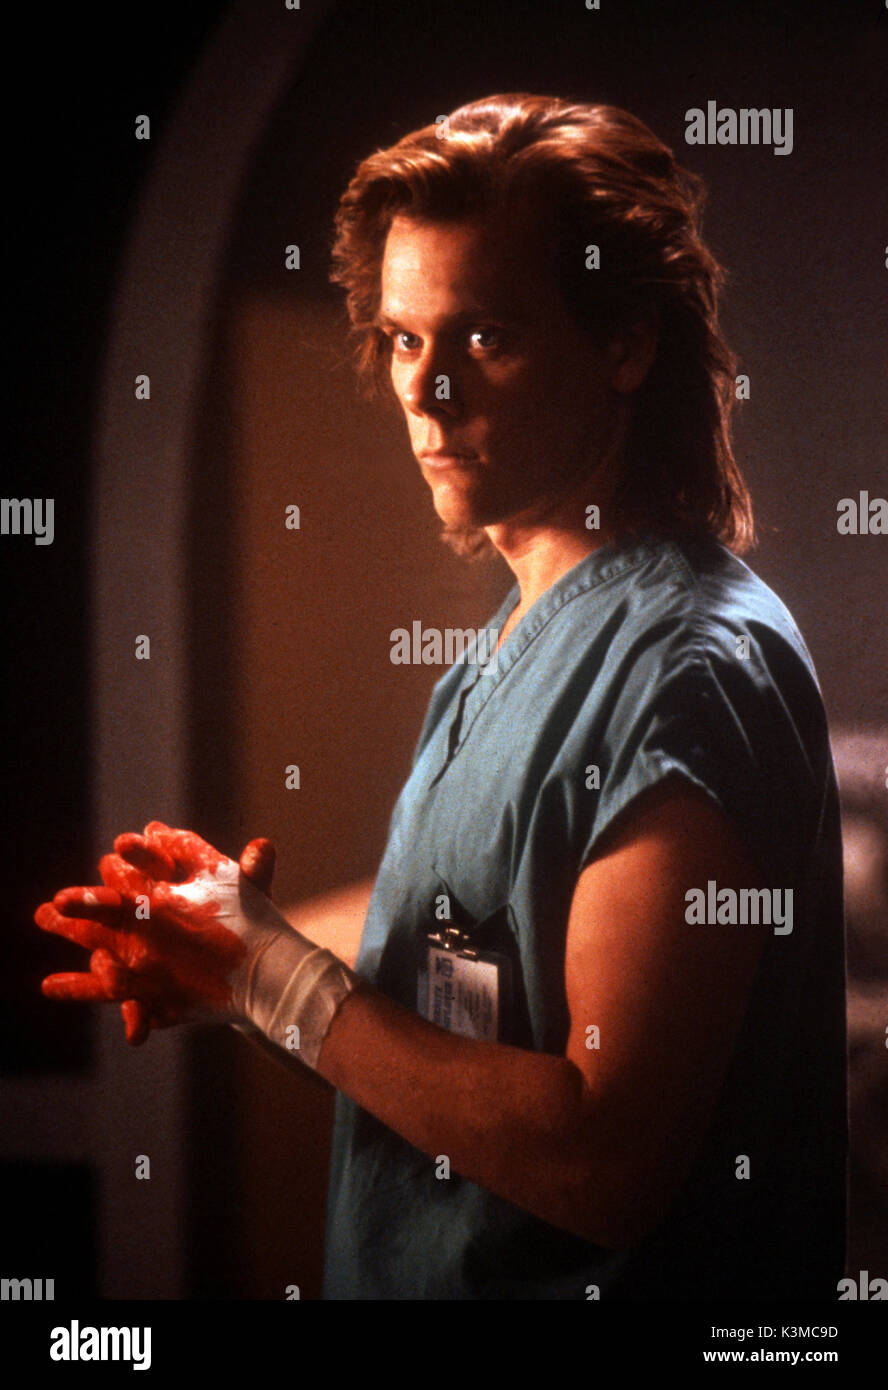 CRIMINAL LAW [US 1988] KEVIN BACON     Date: 1988 Stock Photo